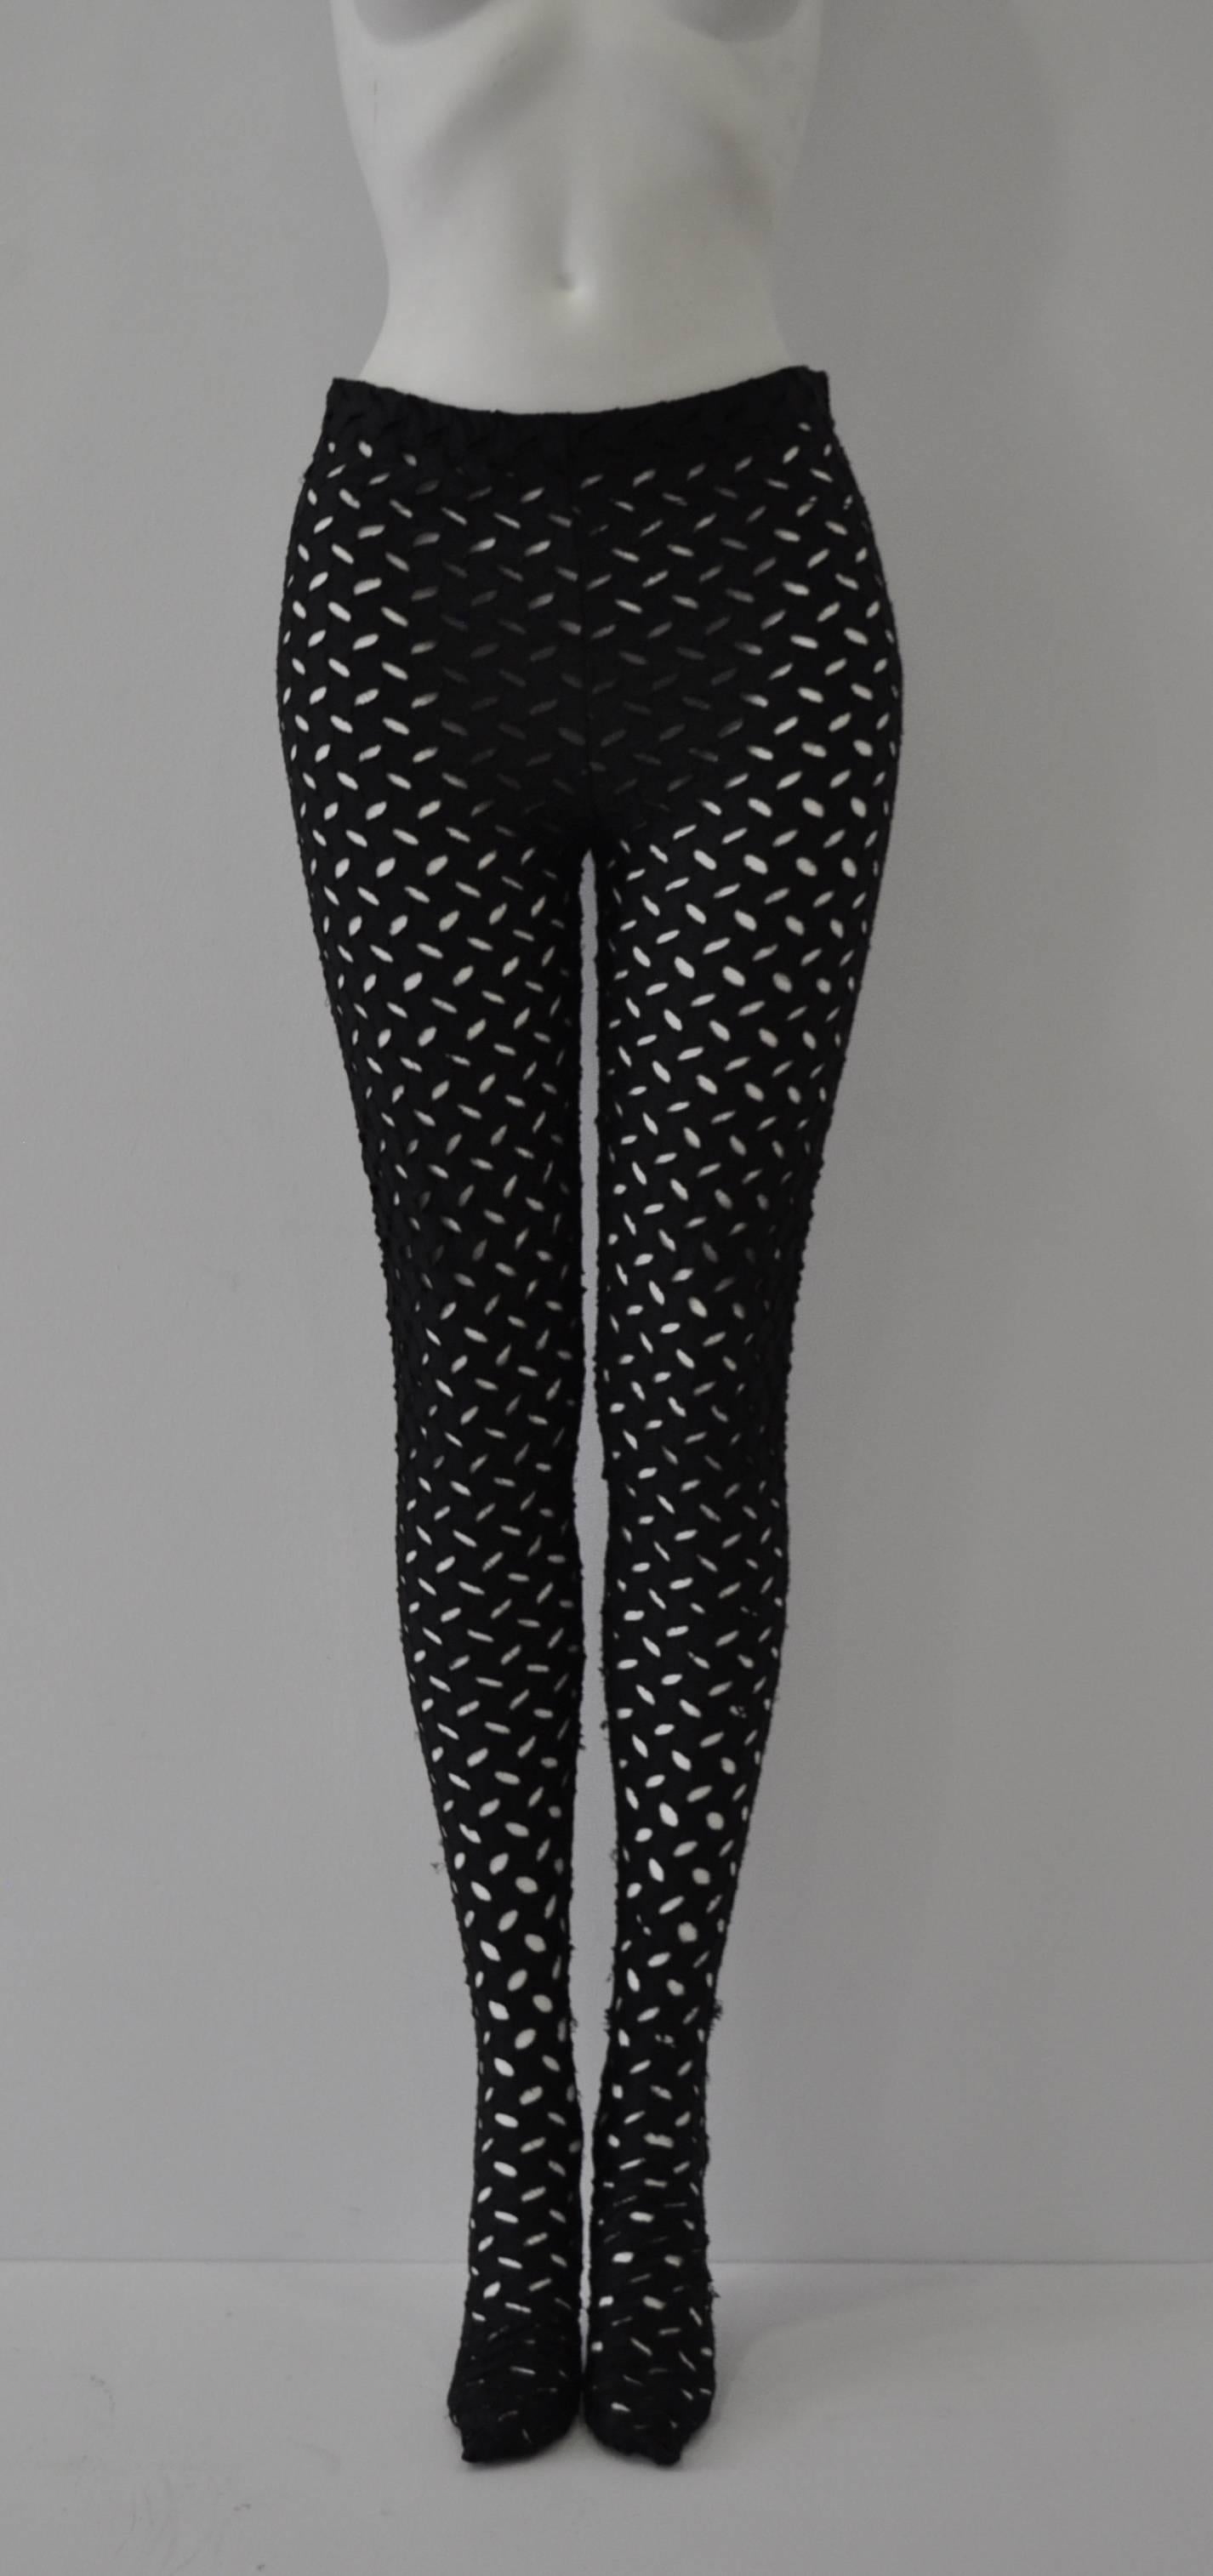 Iconic Gianni Versace Couture Punk Cut-Out Leggings, Notorious Punk Collection Spring 1994